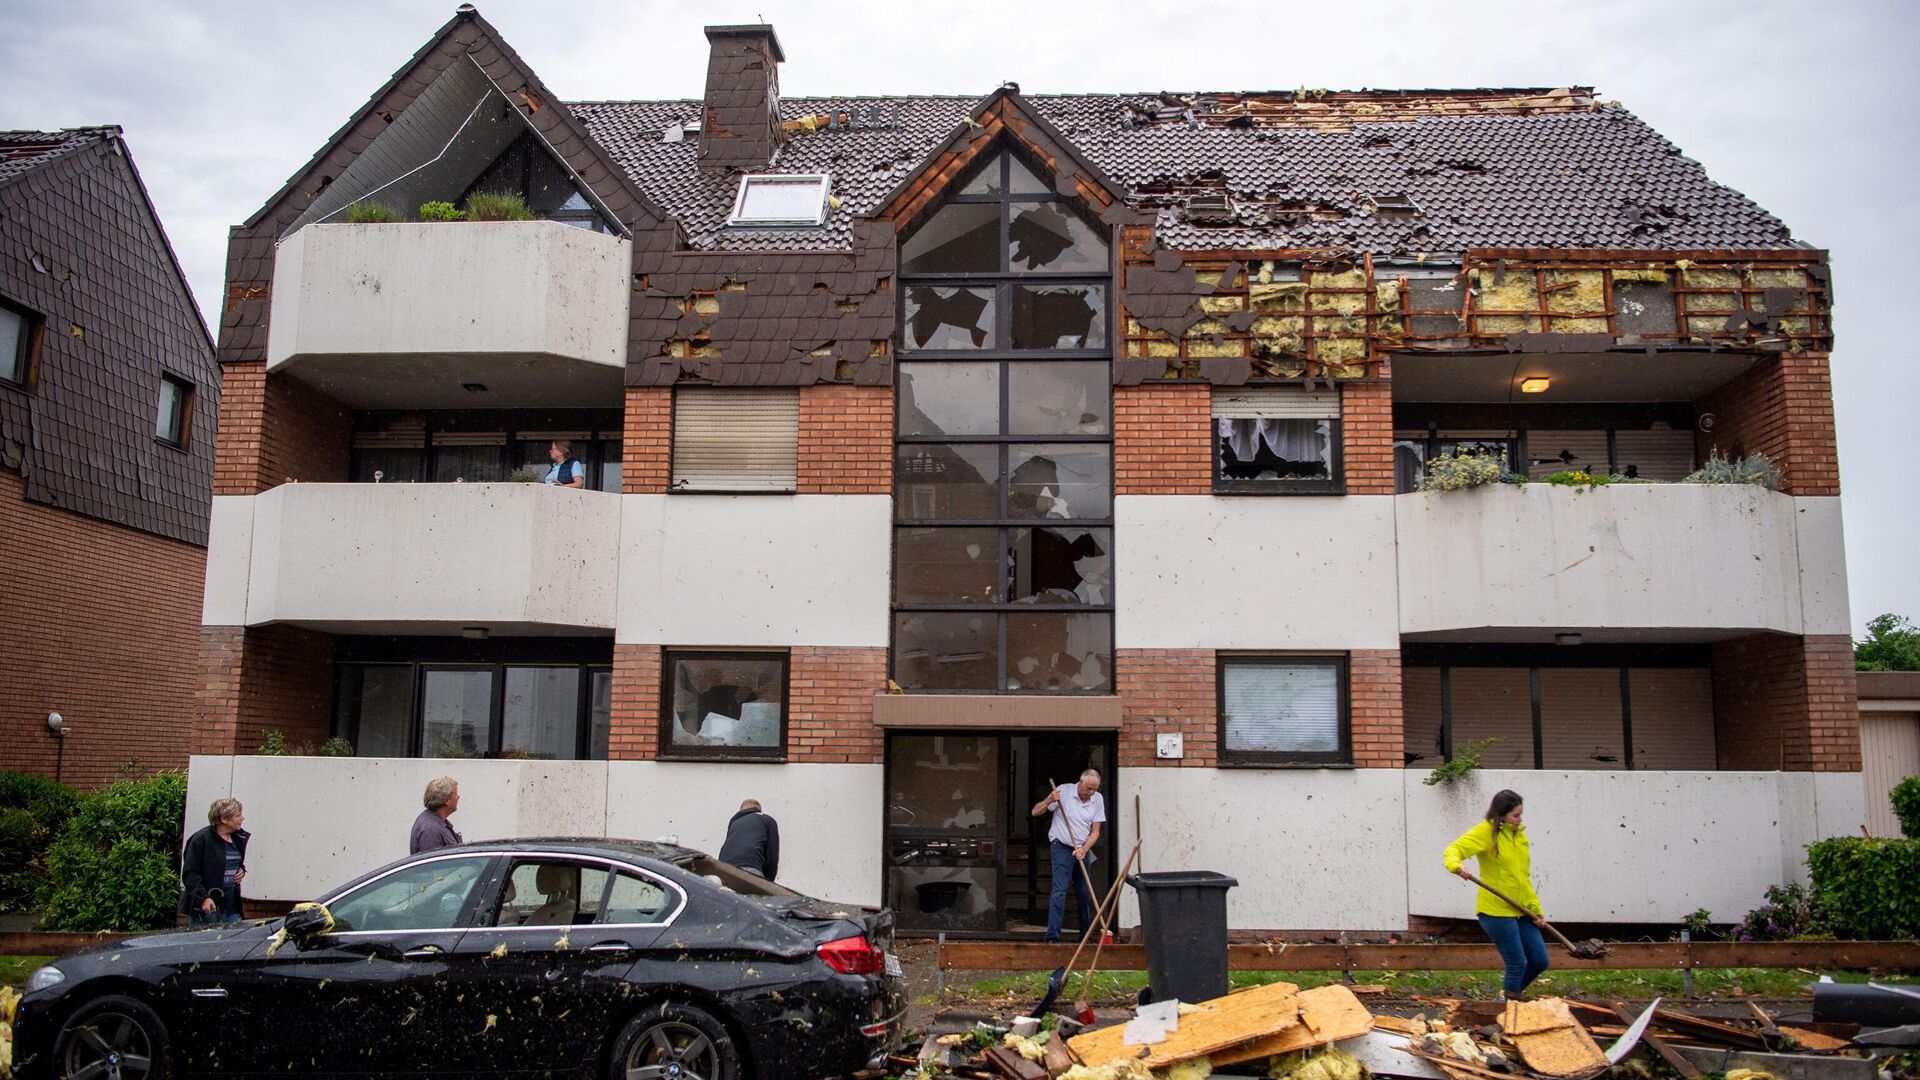 Residents clear the debris in front of an appartment building in Paderborn, western Germany on May 20, 2022, after a storm caused major damage. - Sputnik International, 1920, 21.05.2022